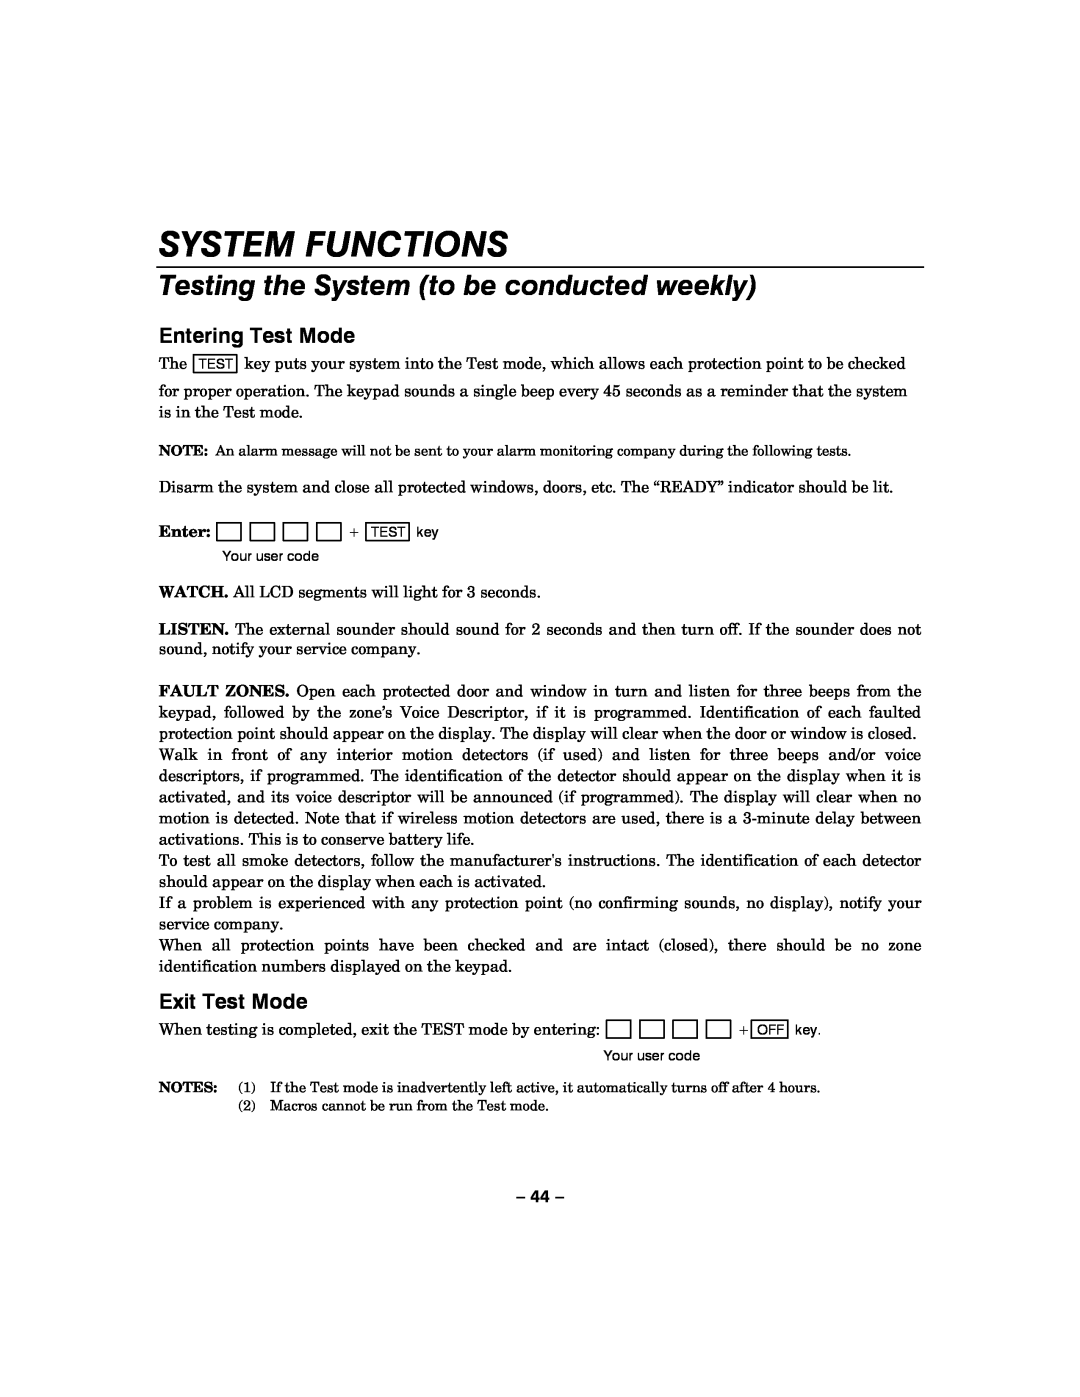 Honeywell LYNXR-I manual Testing the System to be conducted weekly, Entering Test Mode, Exit Test Mode, System Functions 